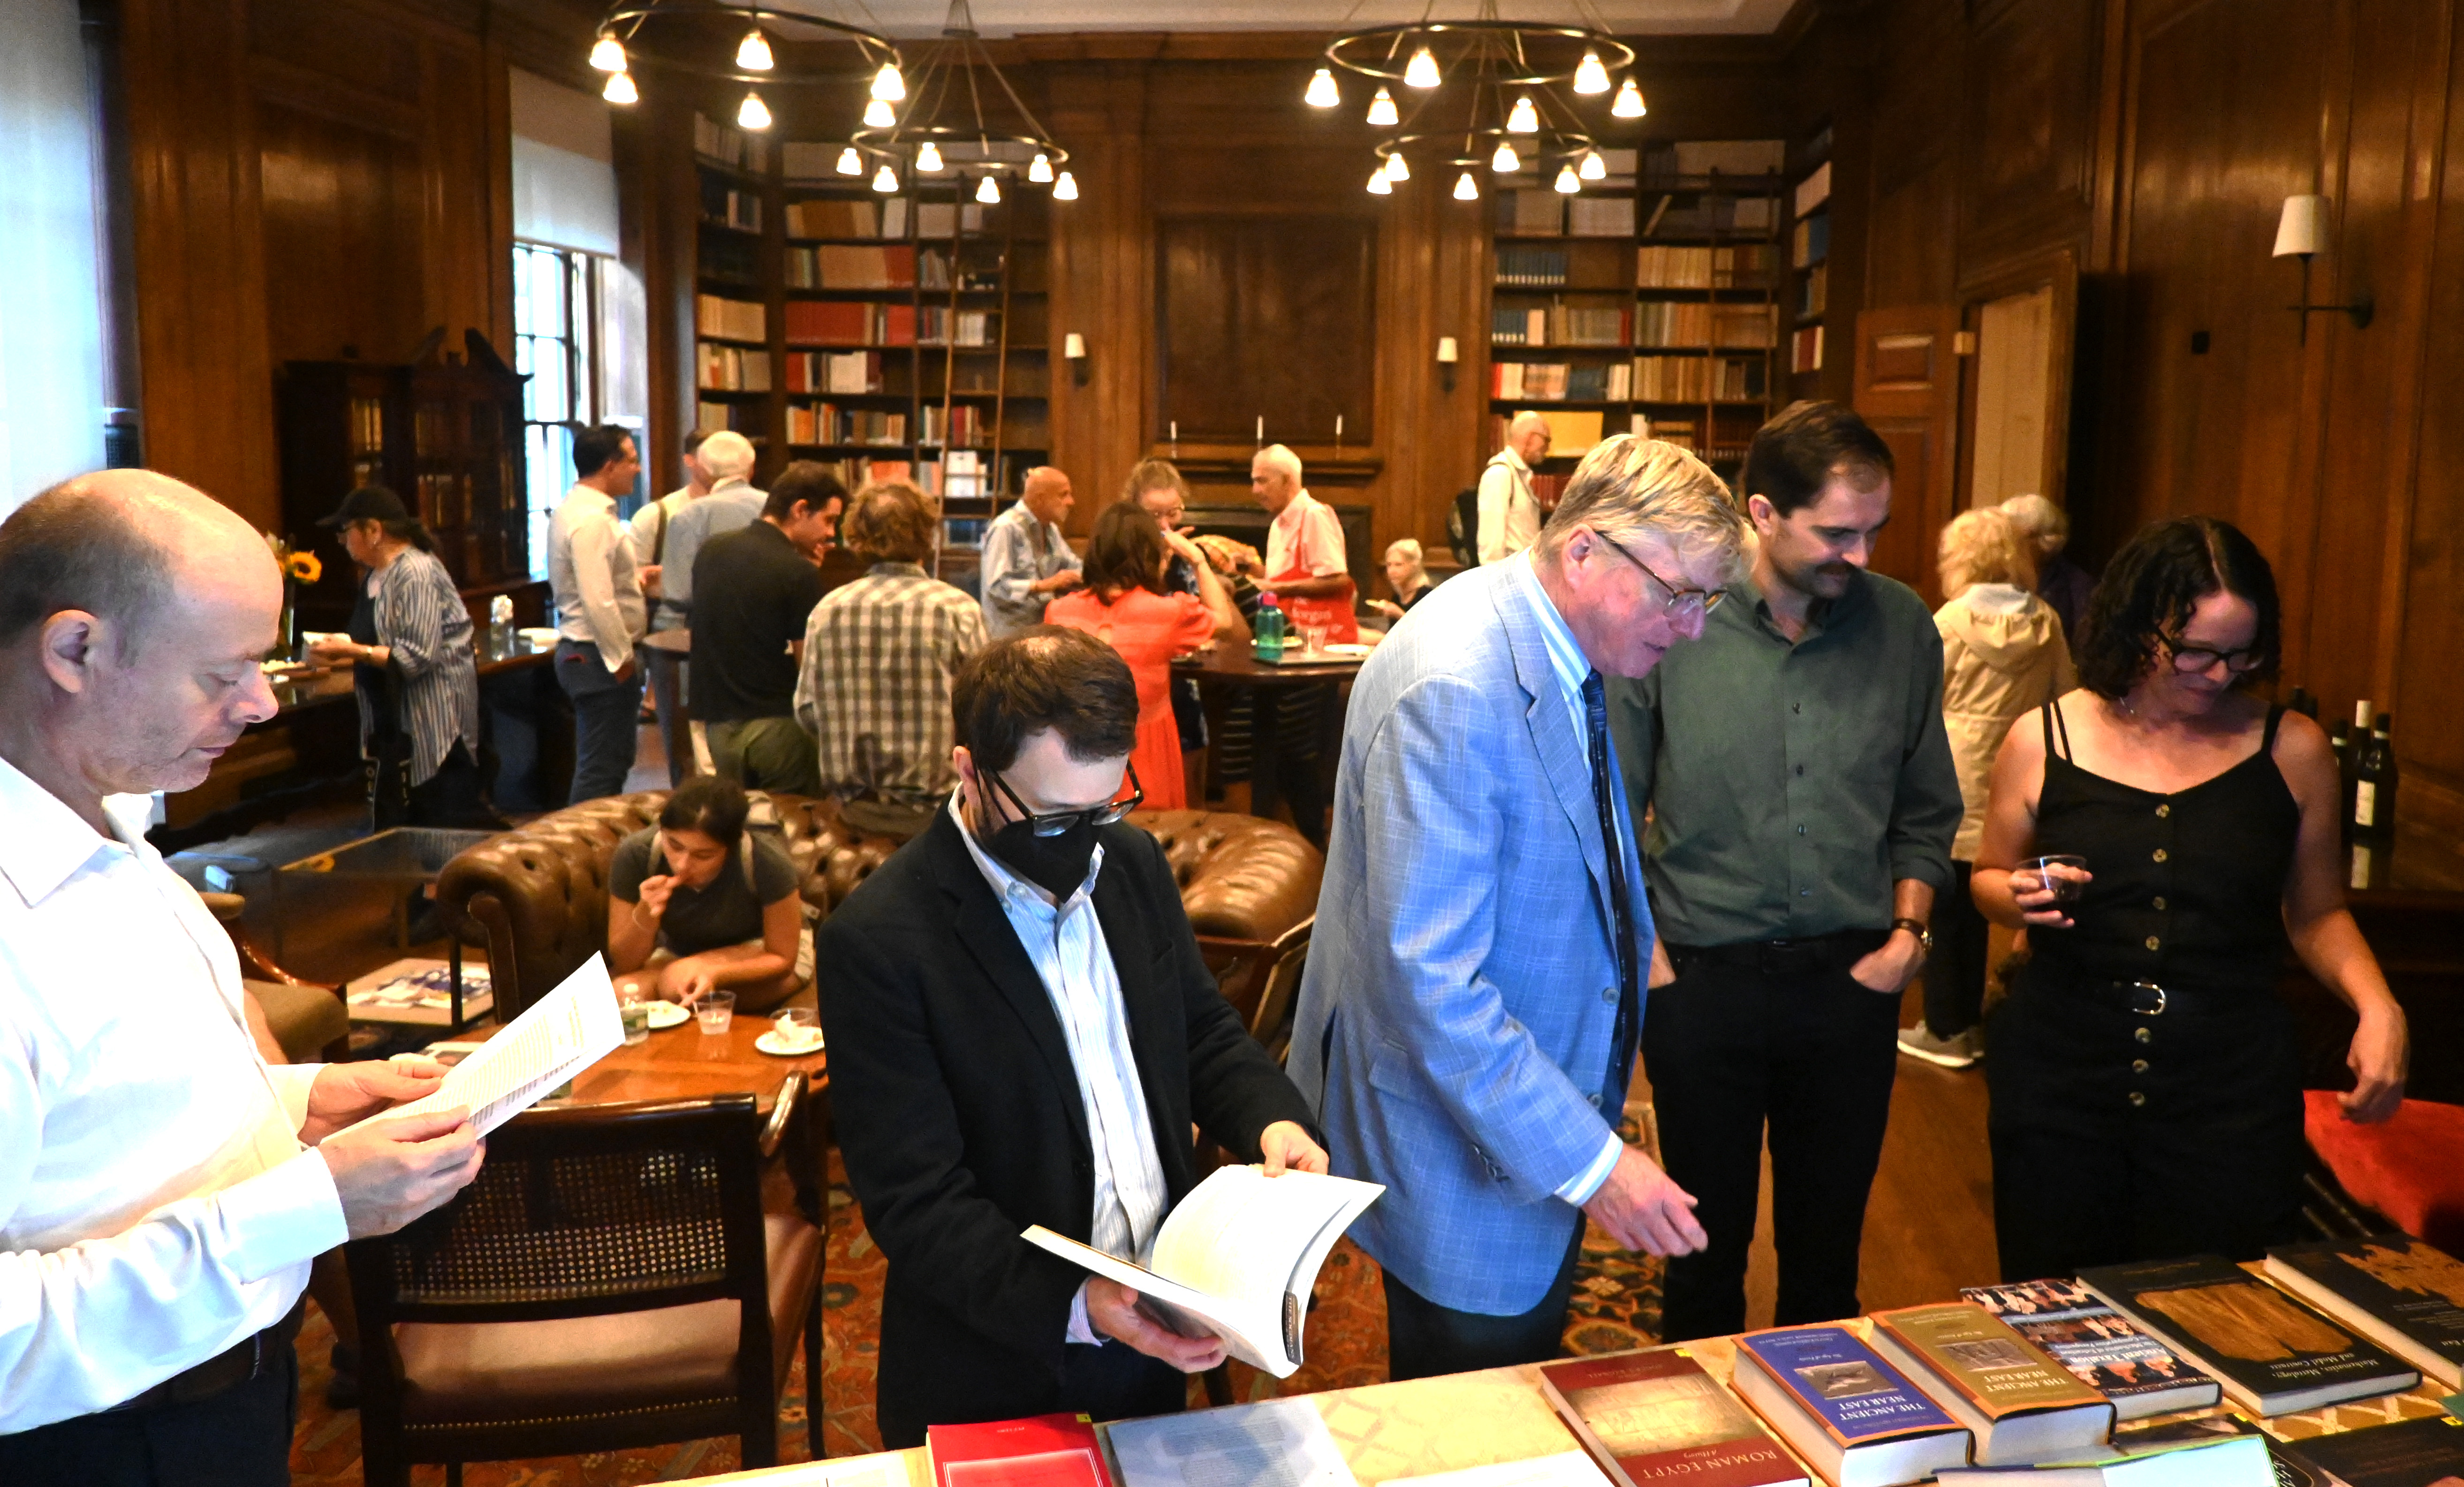 Several attendees of the publication reception mingling in ISAW's Oak library and a smaller group of people checking out the books on display